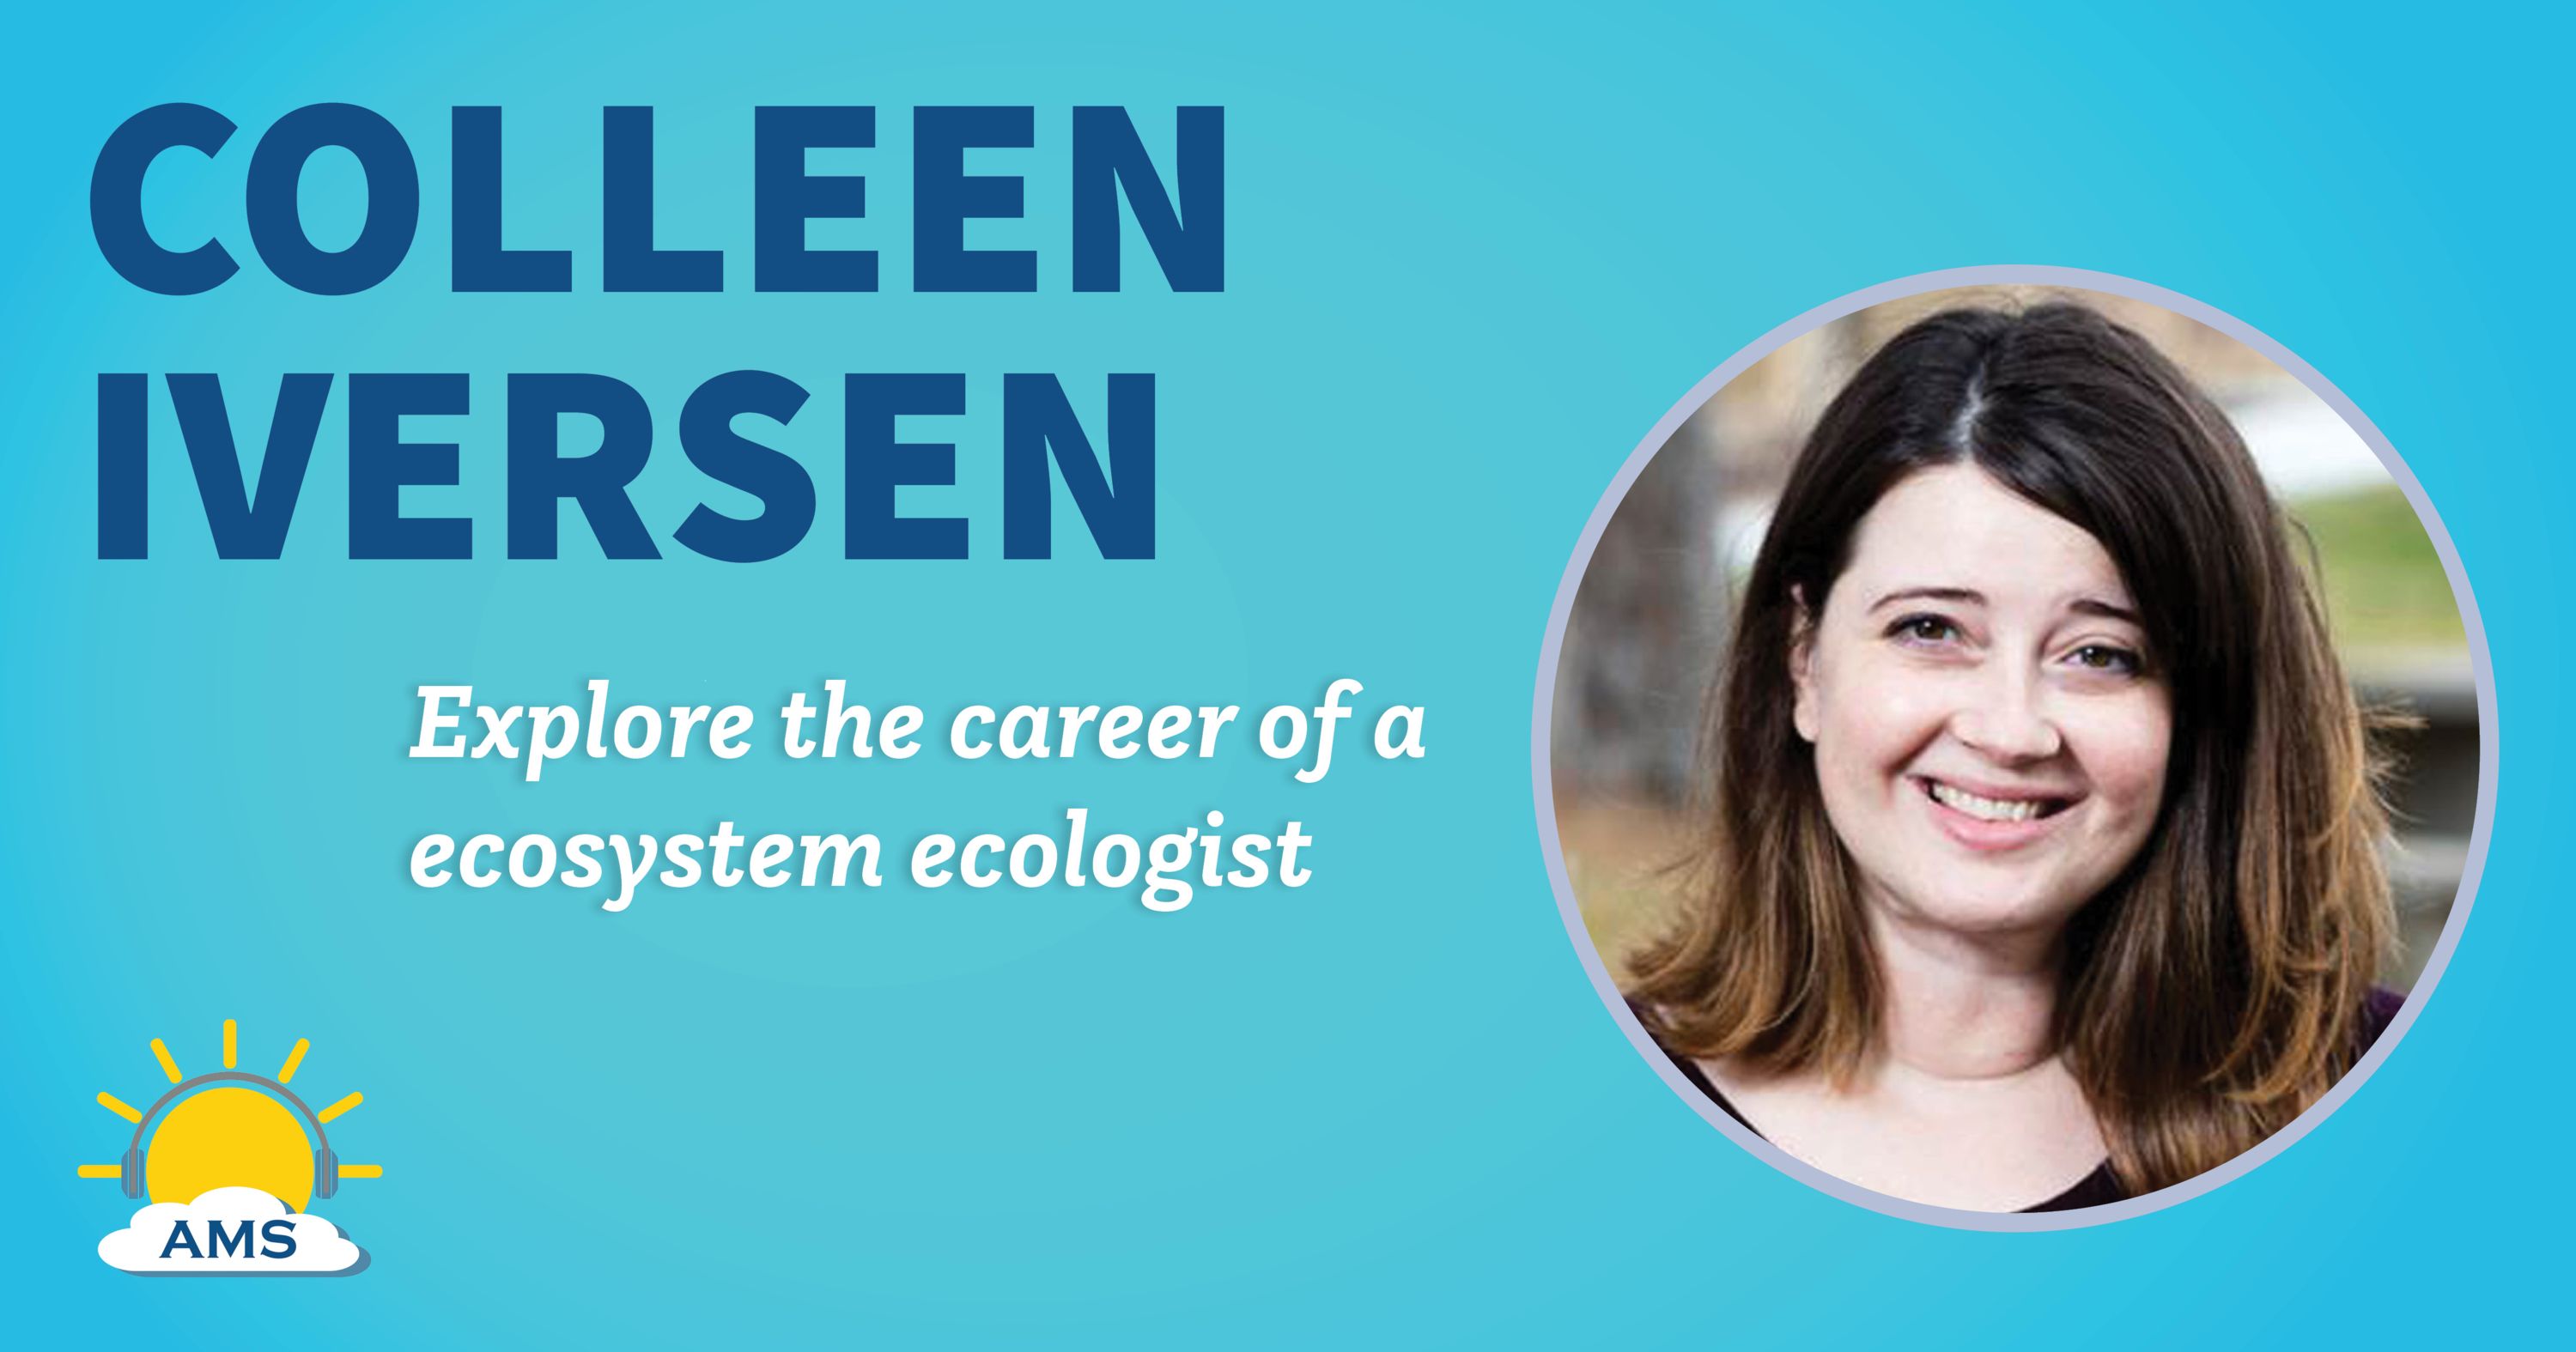 colleen iversen headshot graphic with teaser text that reads &quotexplore the career of an ecosystem ecologist"